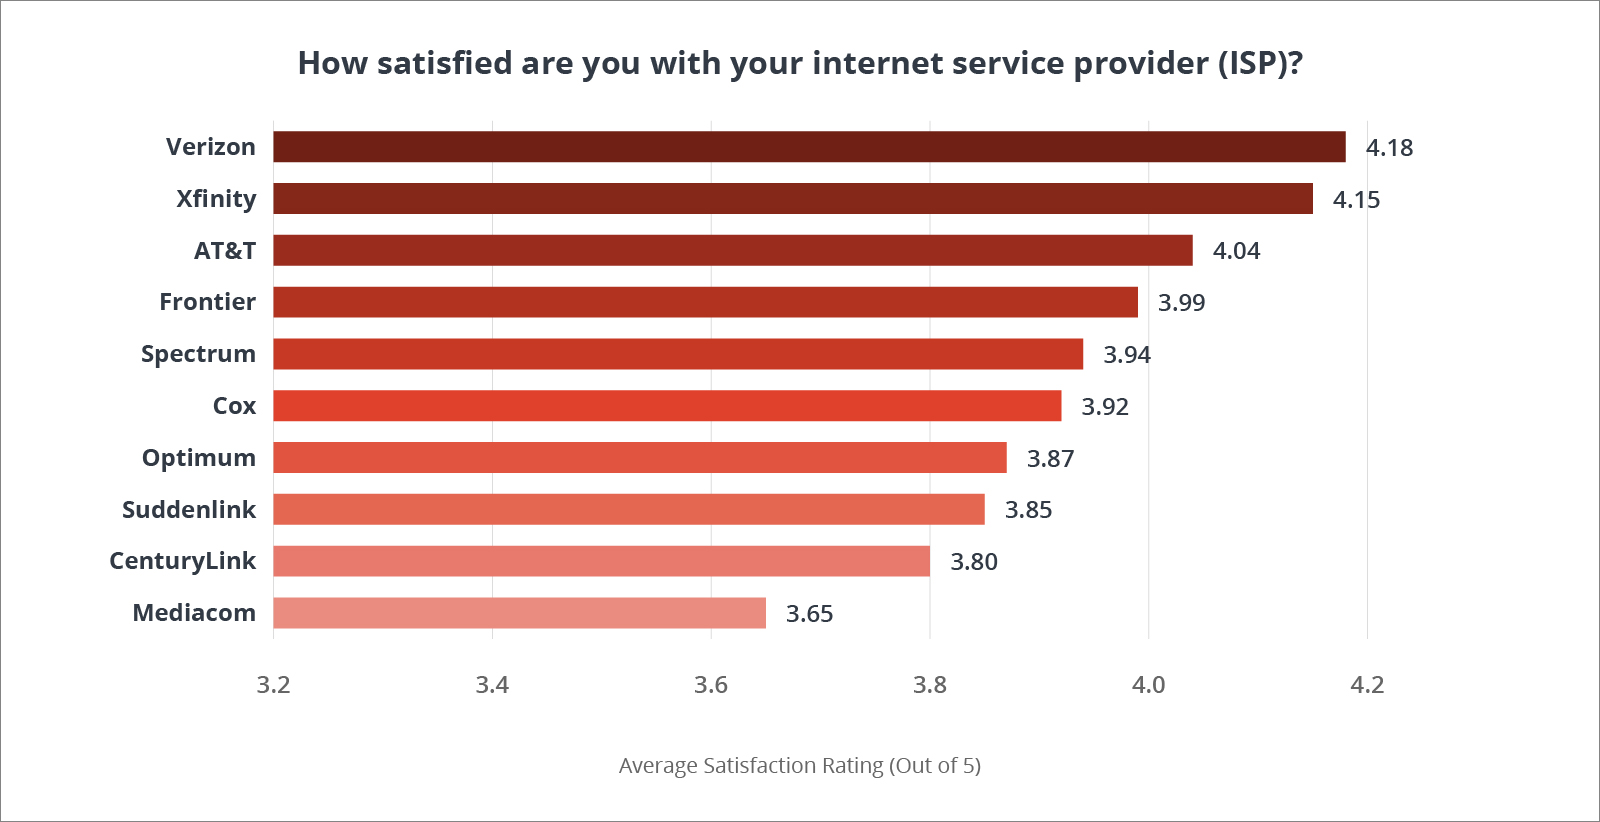 Chart ranking providers based on question, "How satisfied are you with your internet service provider (ISP)?"